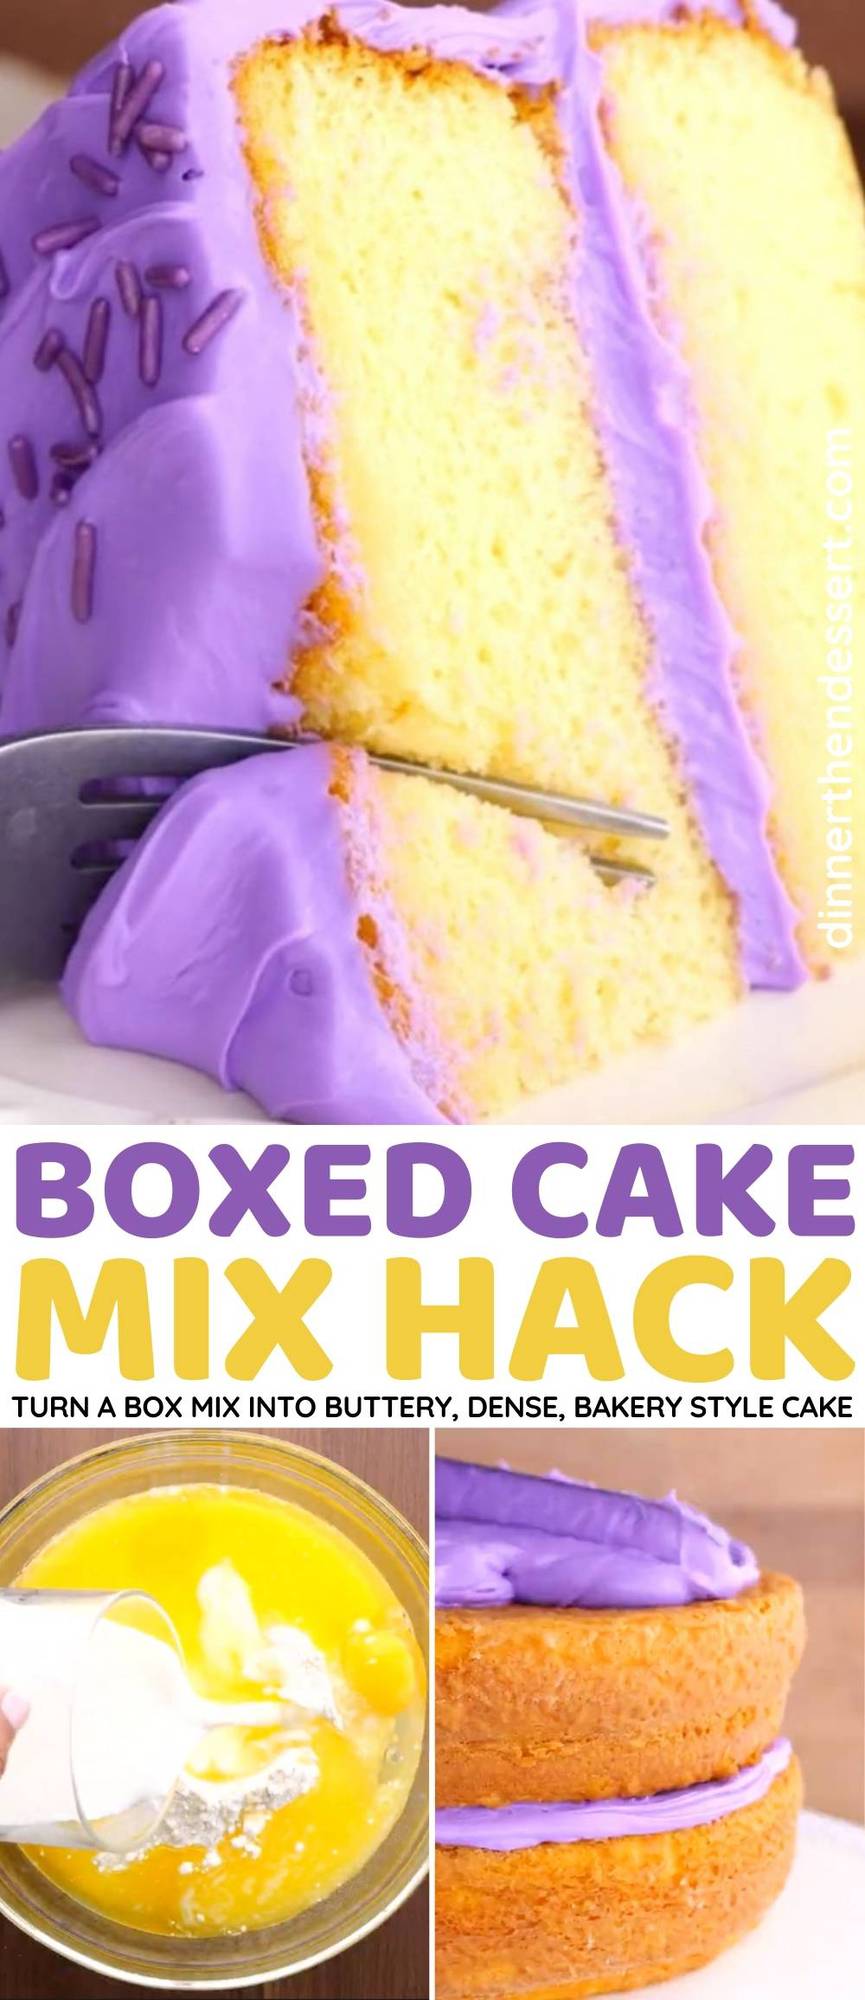 Boxed Cake Mix Hack Collage